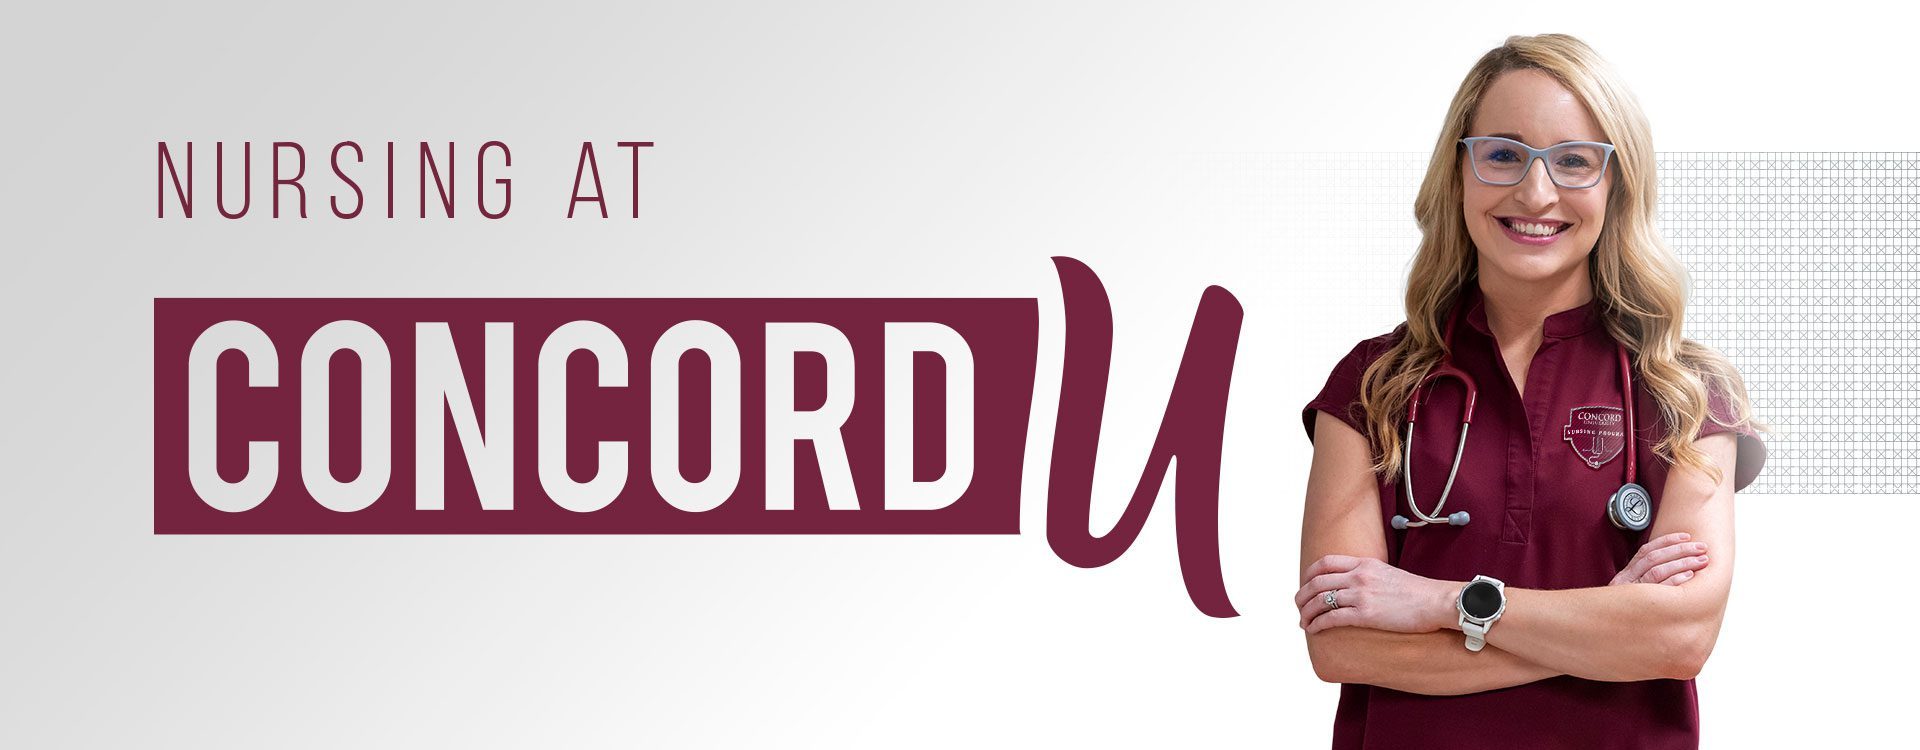 Nursing at Concord University! Click here to learn more about our new nursing program.